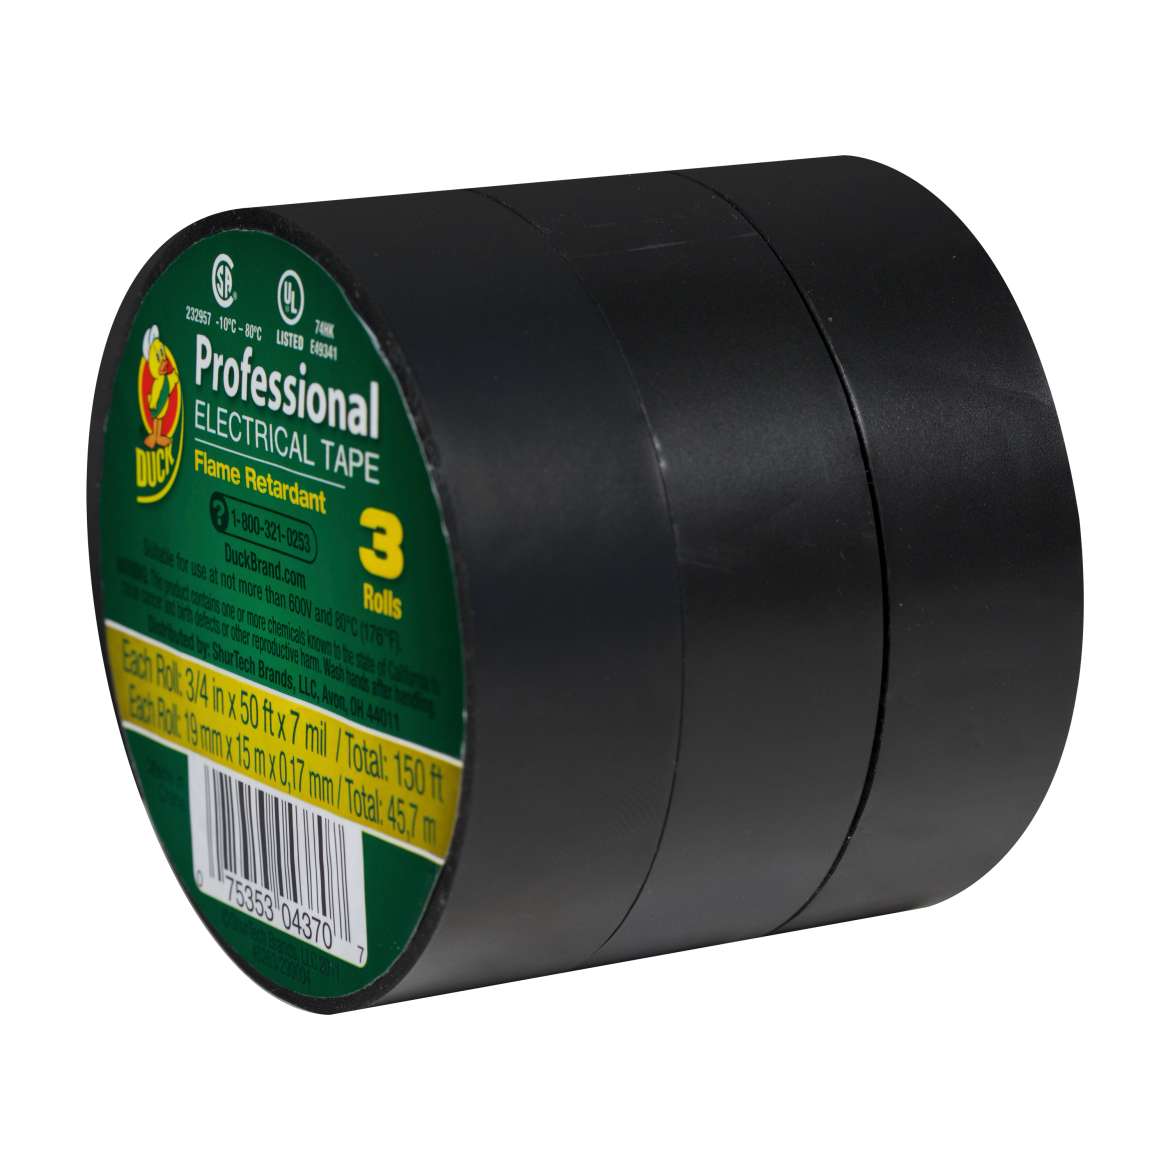 Professional Electrical Tape Image